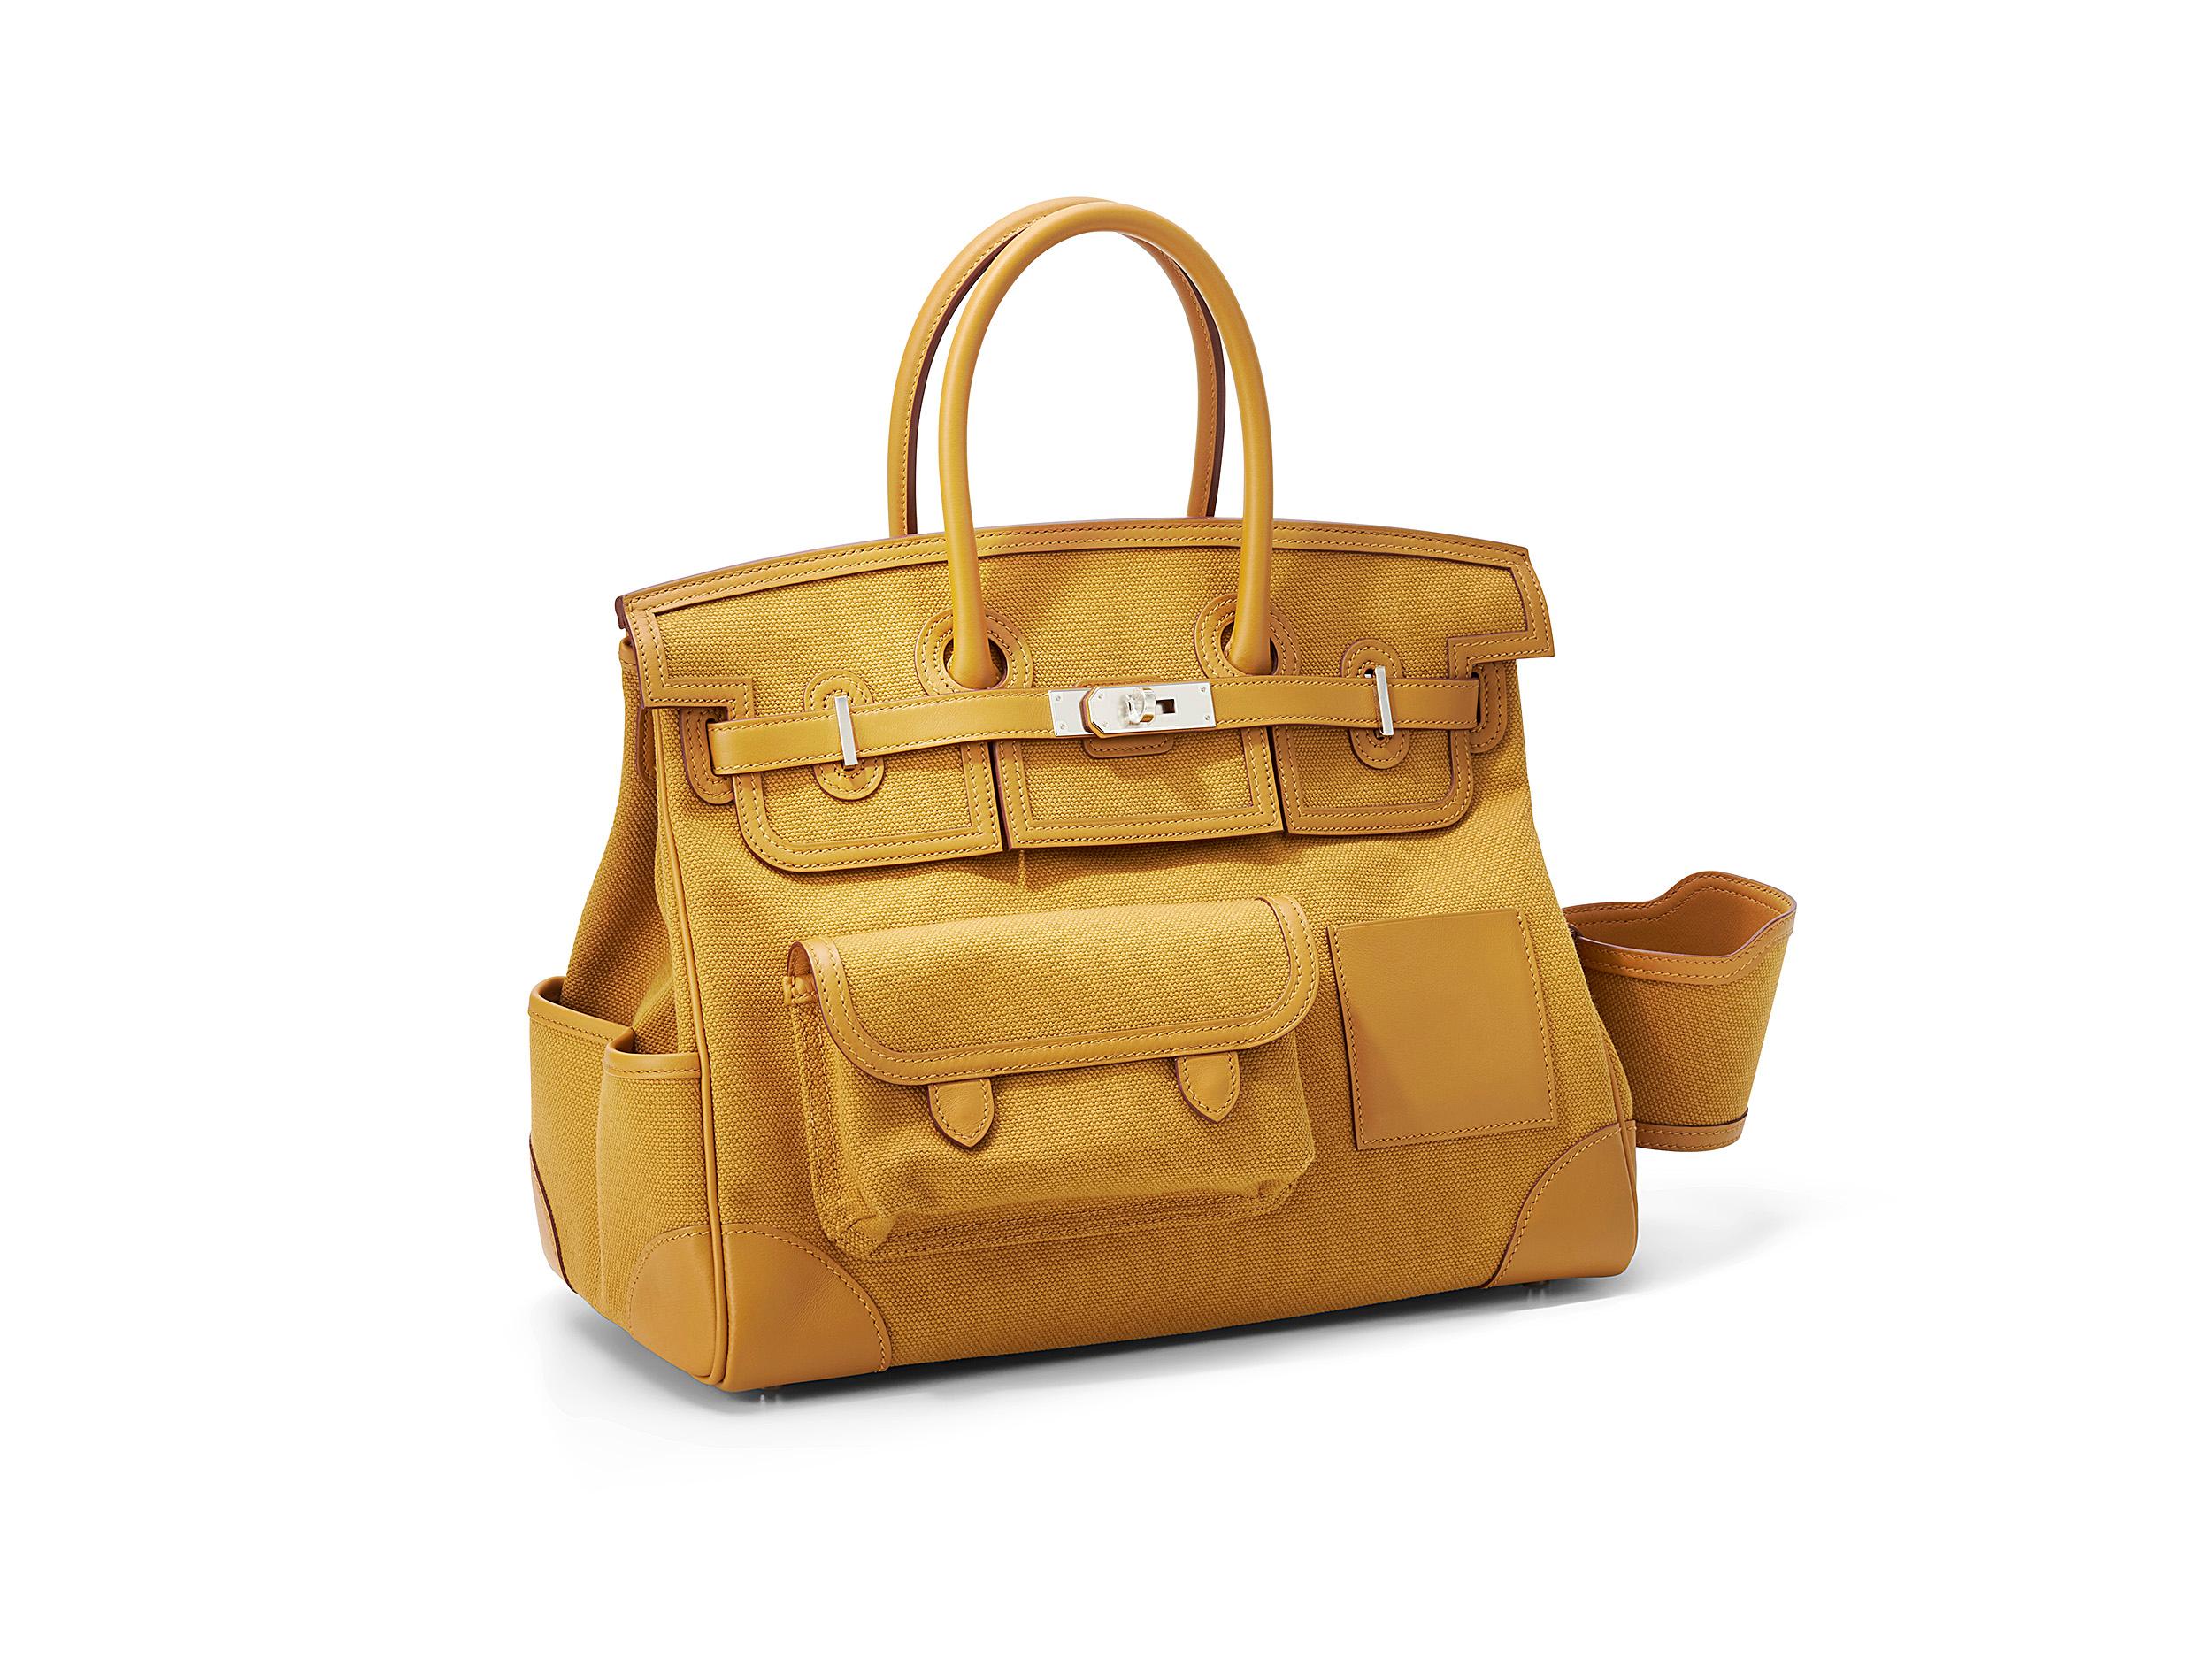 Hermès Birkin Cargo 35 in sesame and canvas swift leather with palladium hardware. The bag is unworn and comes as full set with the original receipt.

Stamp Z (2021) 

